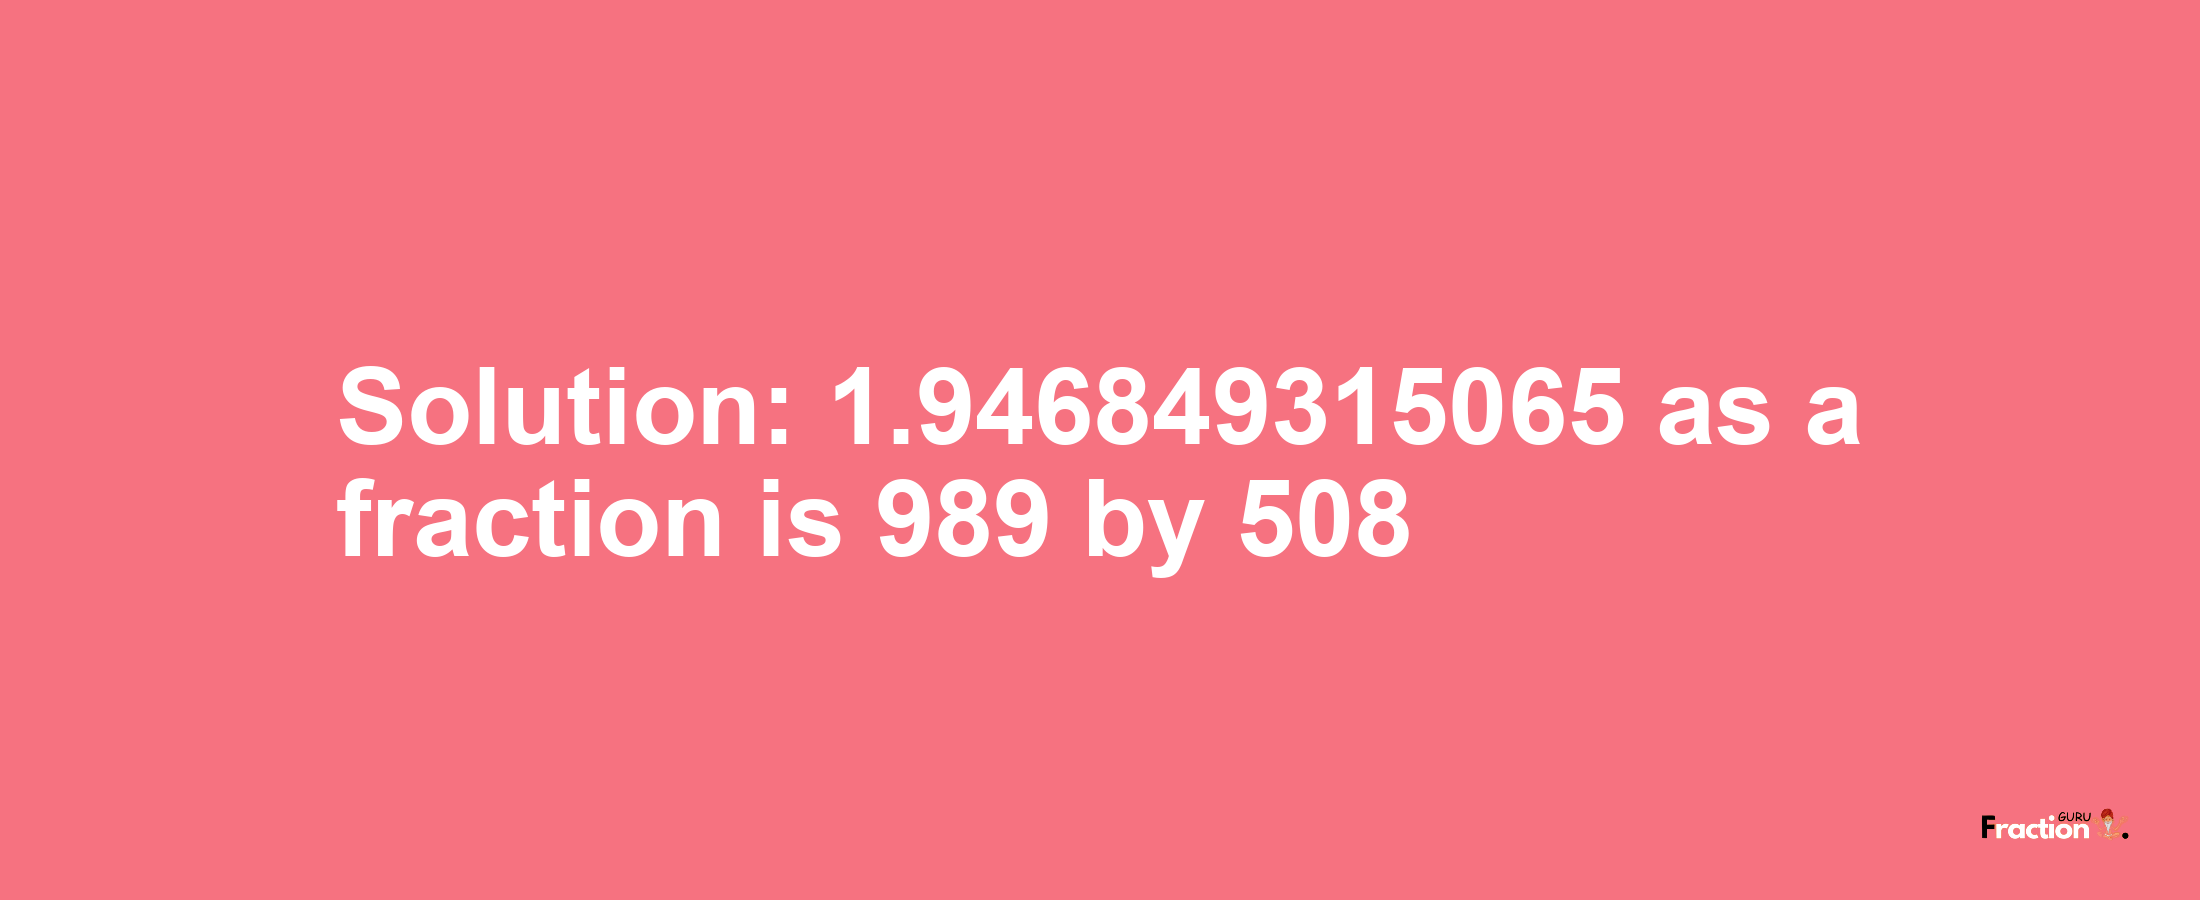 Solution:1.946849315065 as a fraction is 989/508